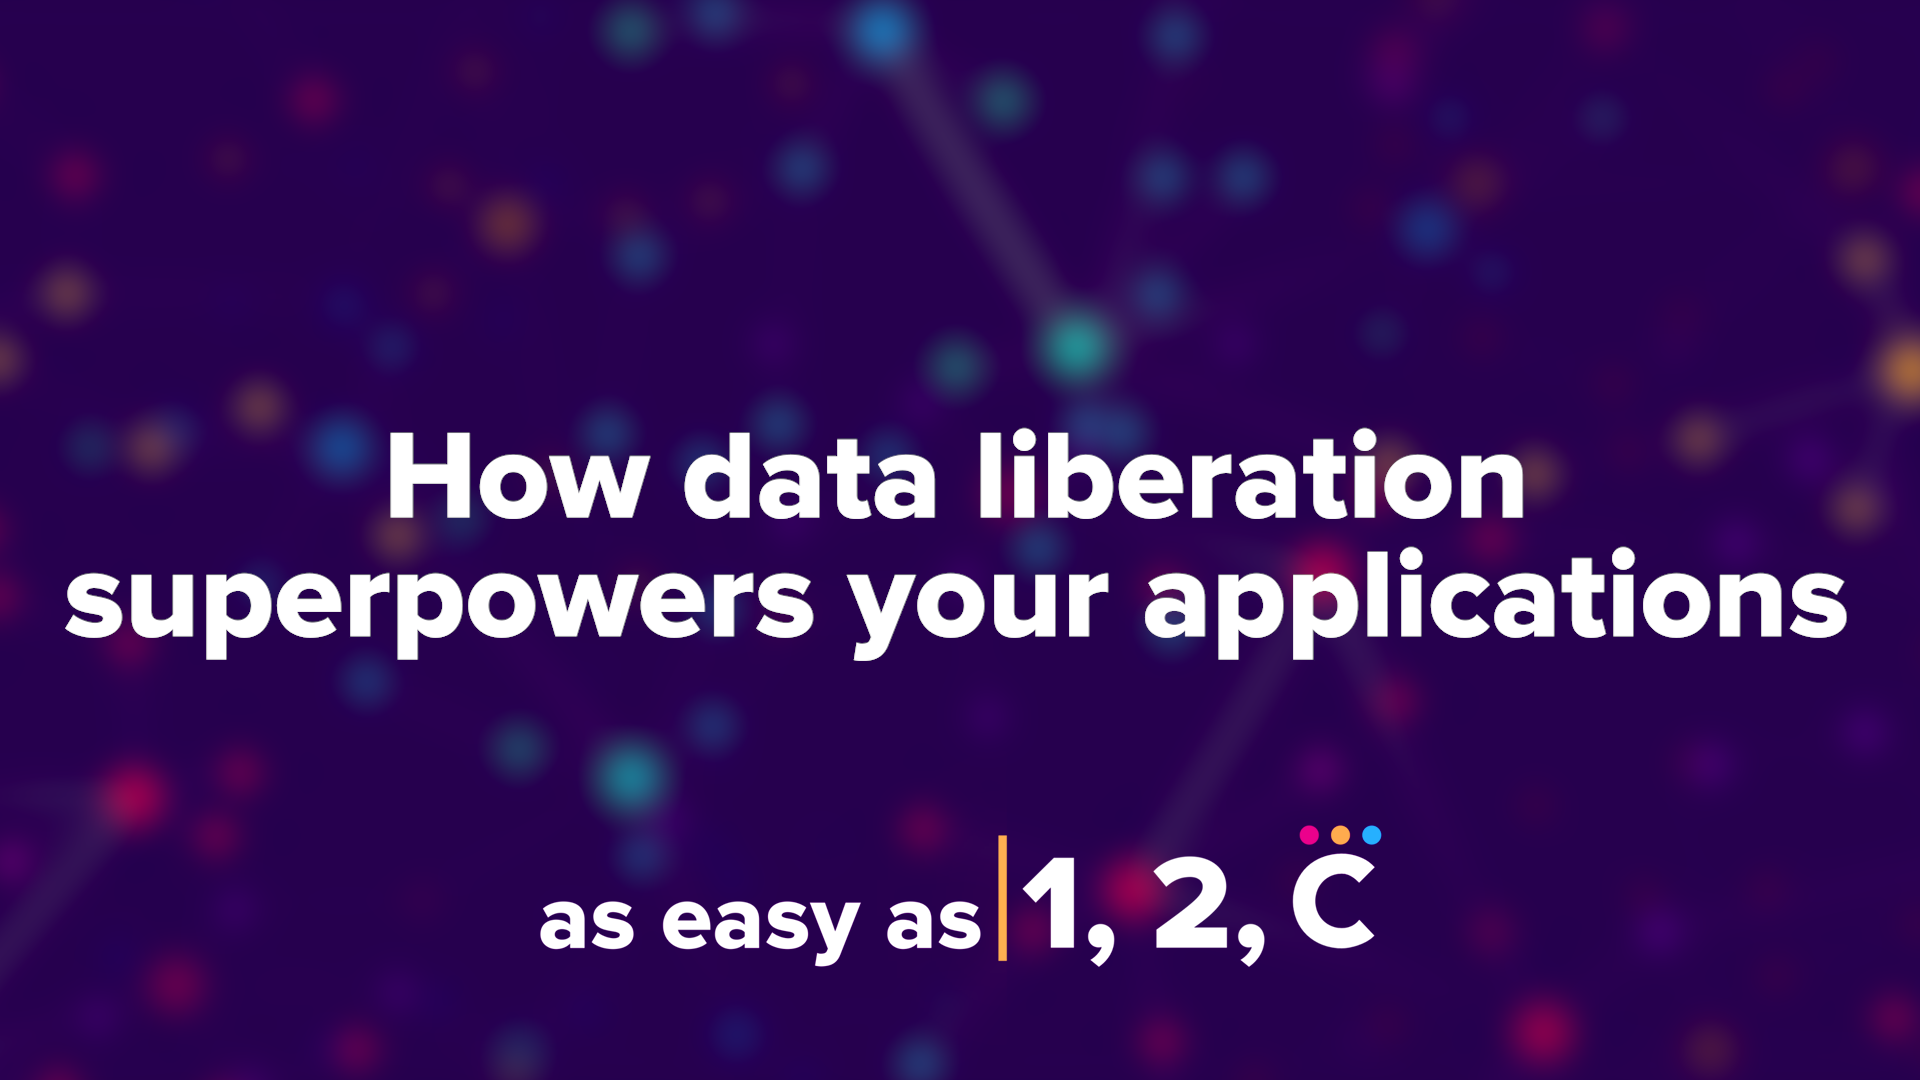 As Easy As 1, 2, C: How Data Liberation Superpowers Your Applications